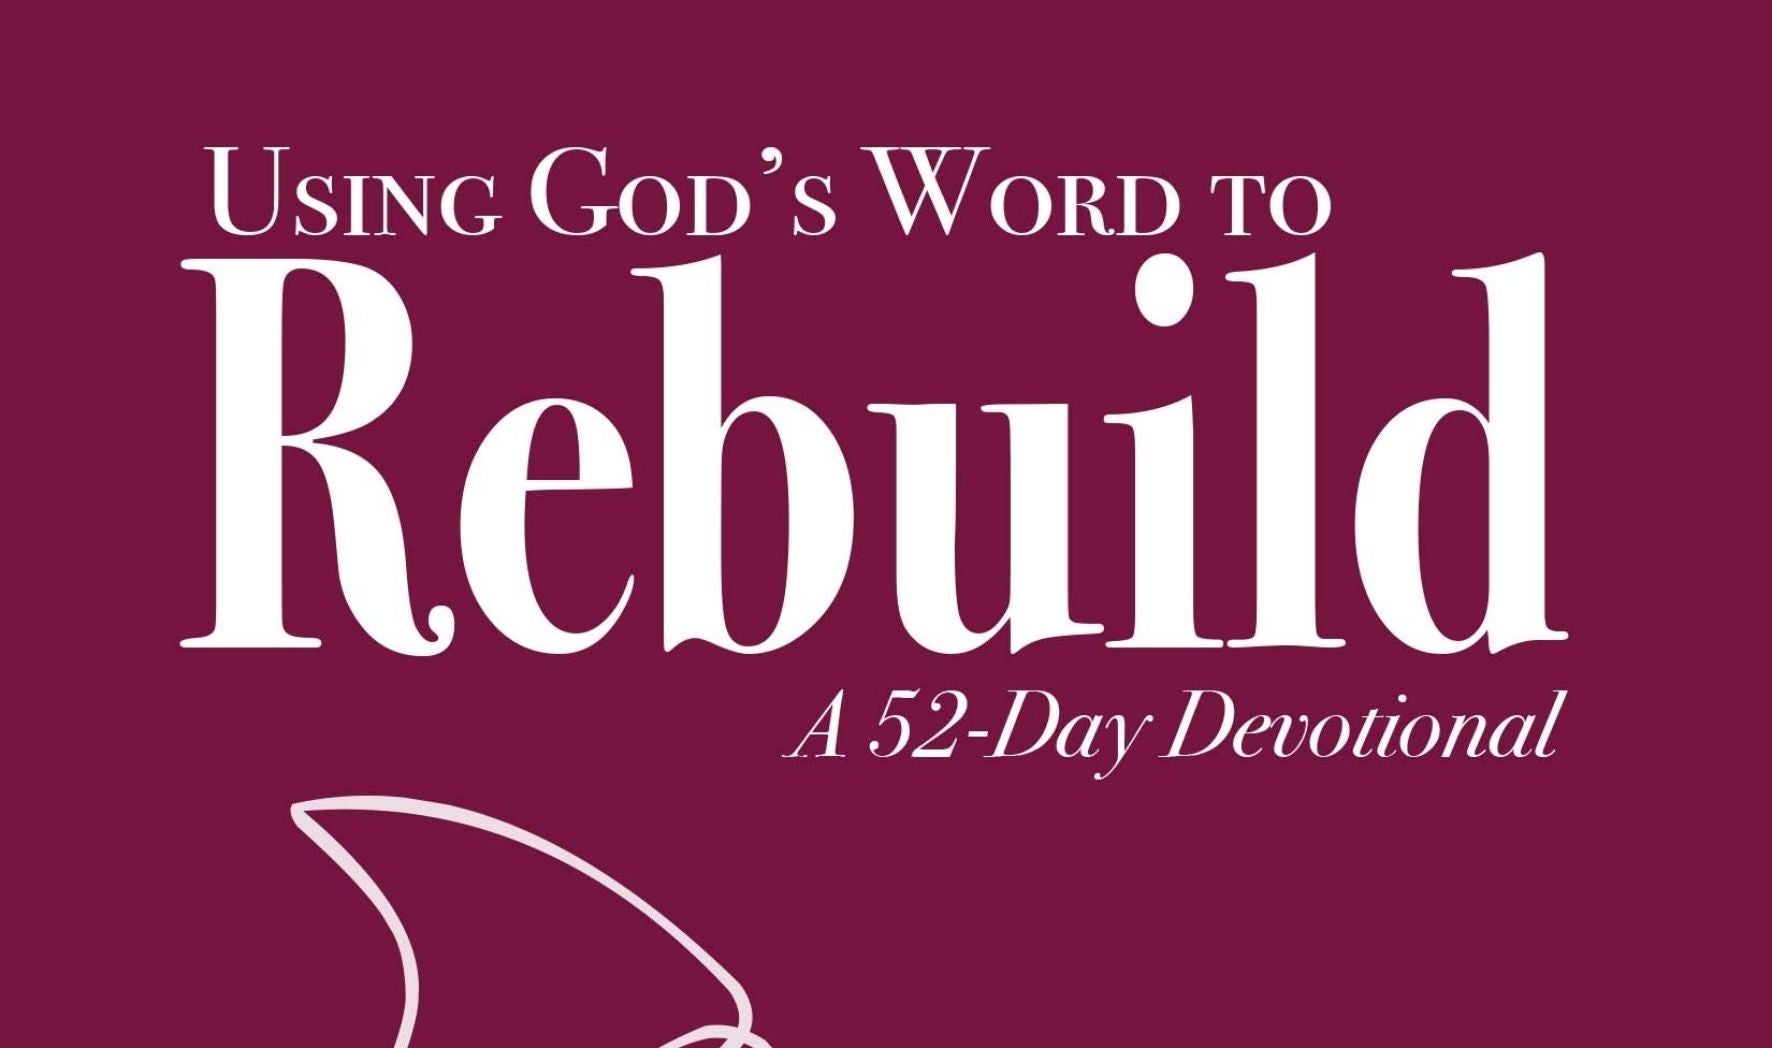 More Info for Using God's Word To Rebuild A 52-Day Devotional Book Release